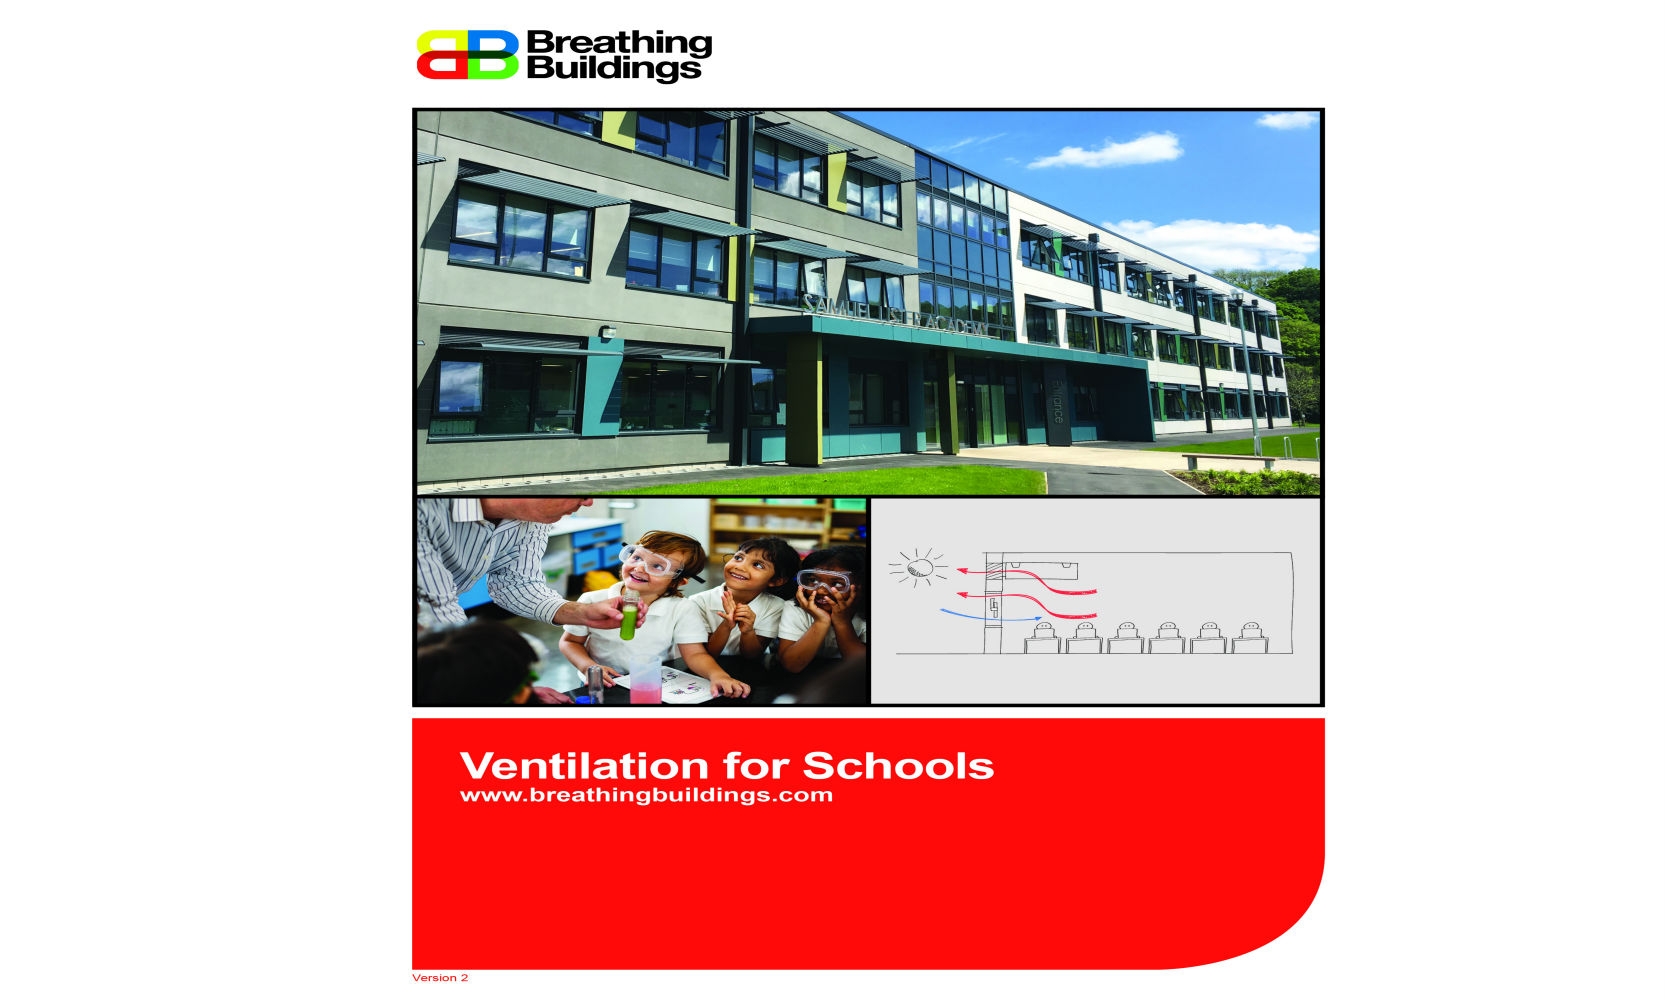 Breathing Buildings launches new education brochure